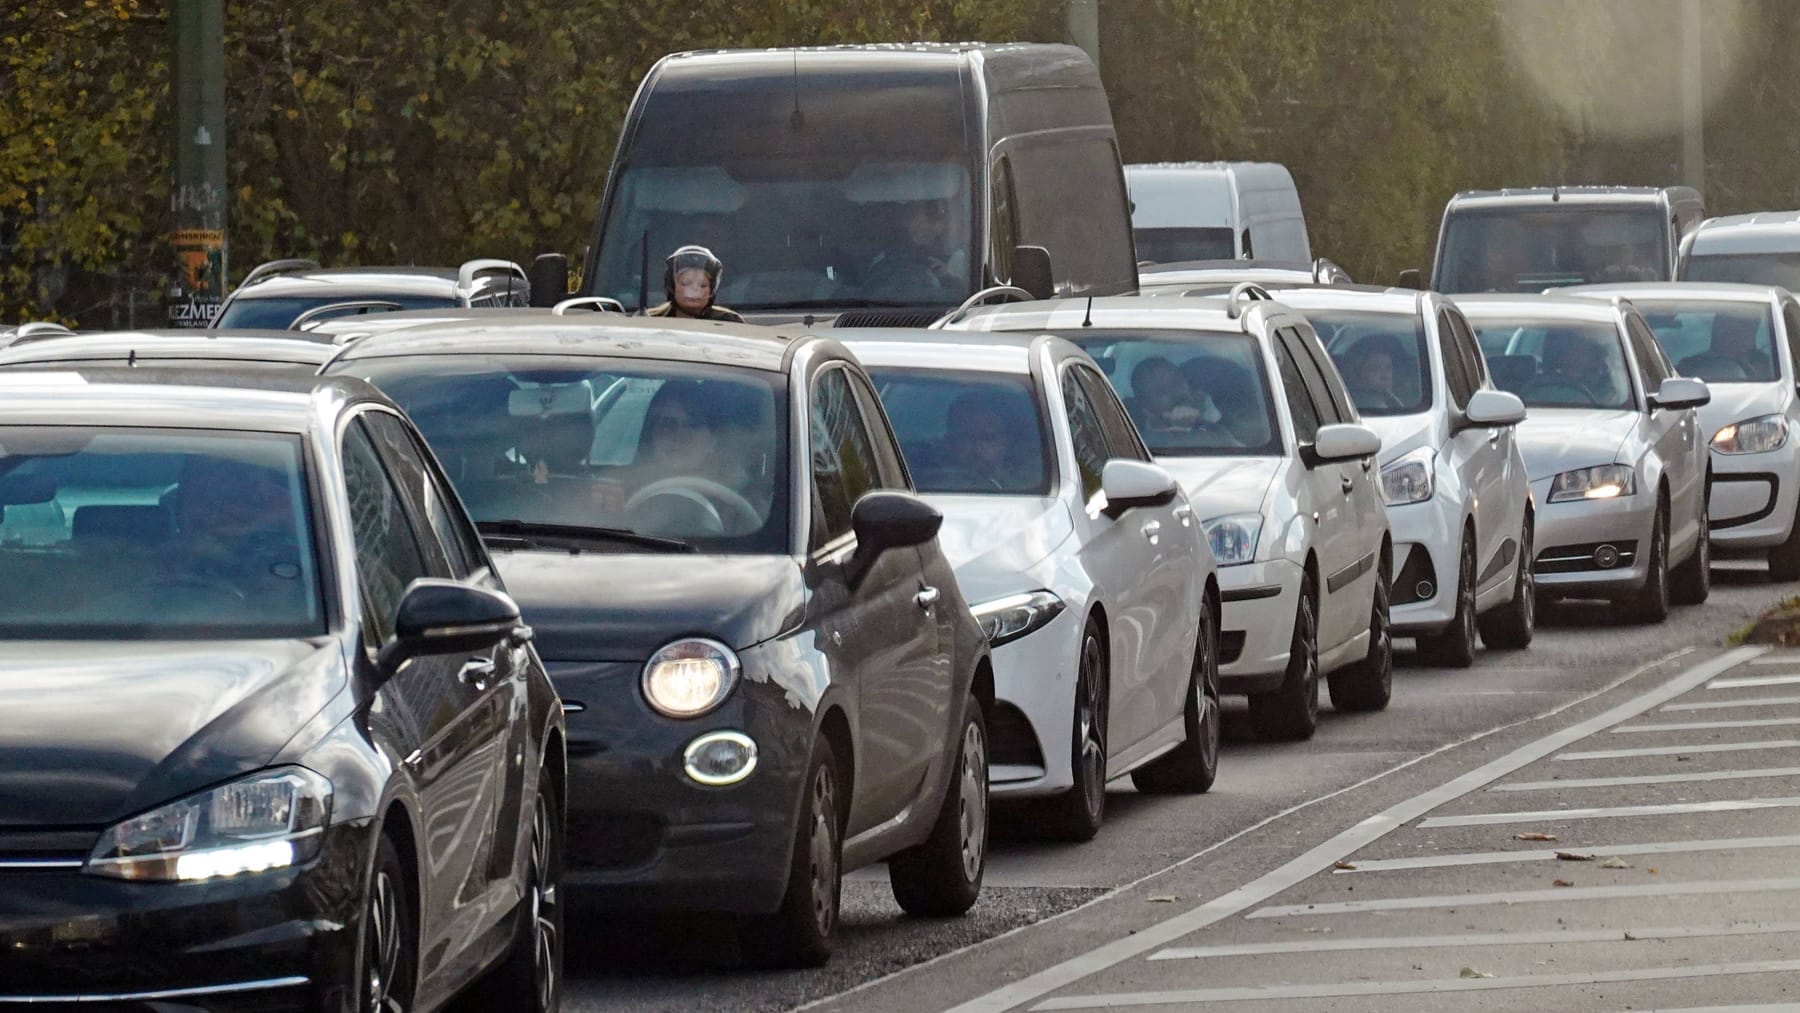 Germany is driving fewer and fewer cars